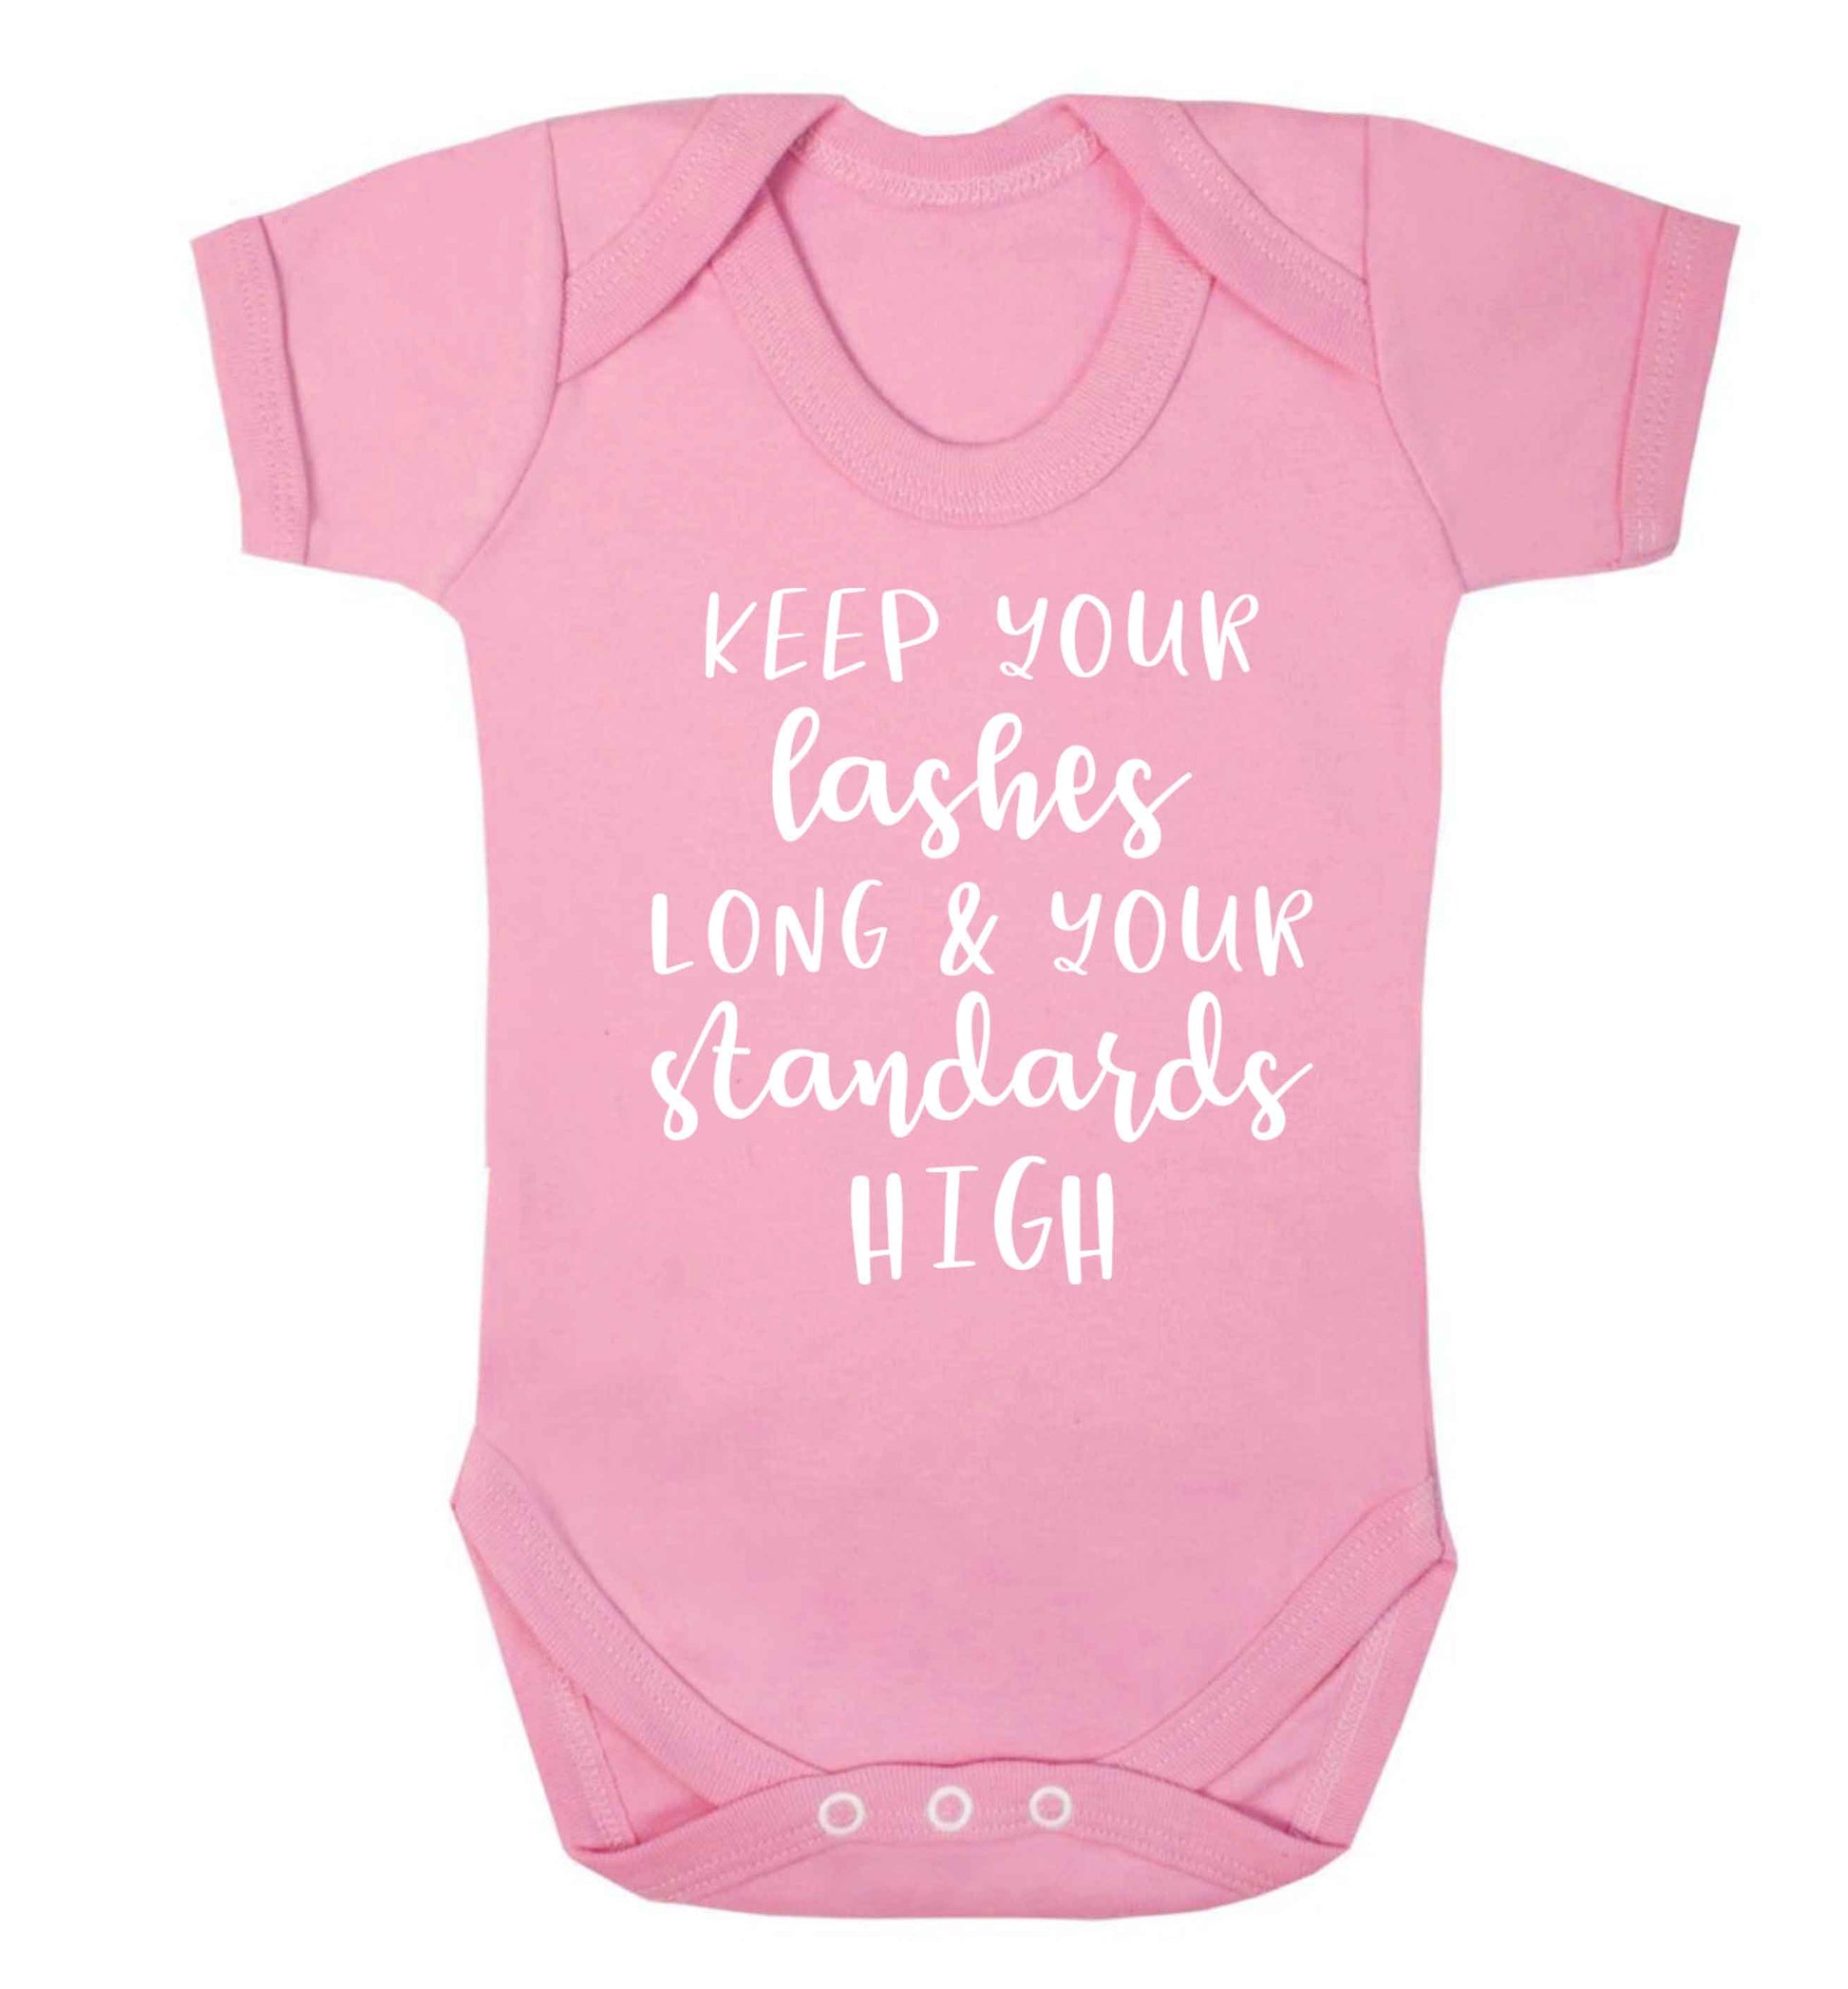 Keep your lashes long and your standards high Baby Vest pale pink 18-24 months